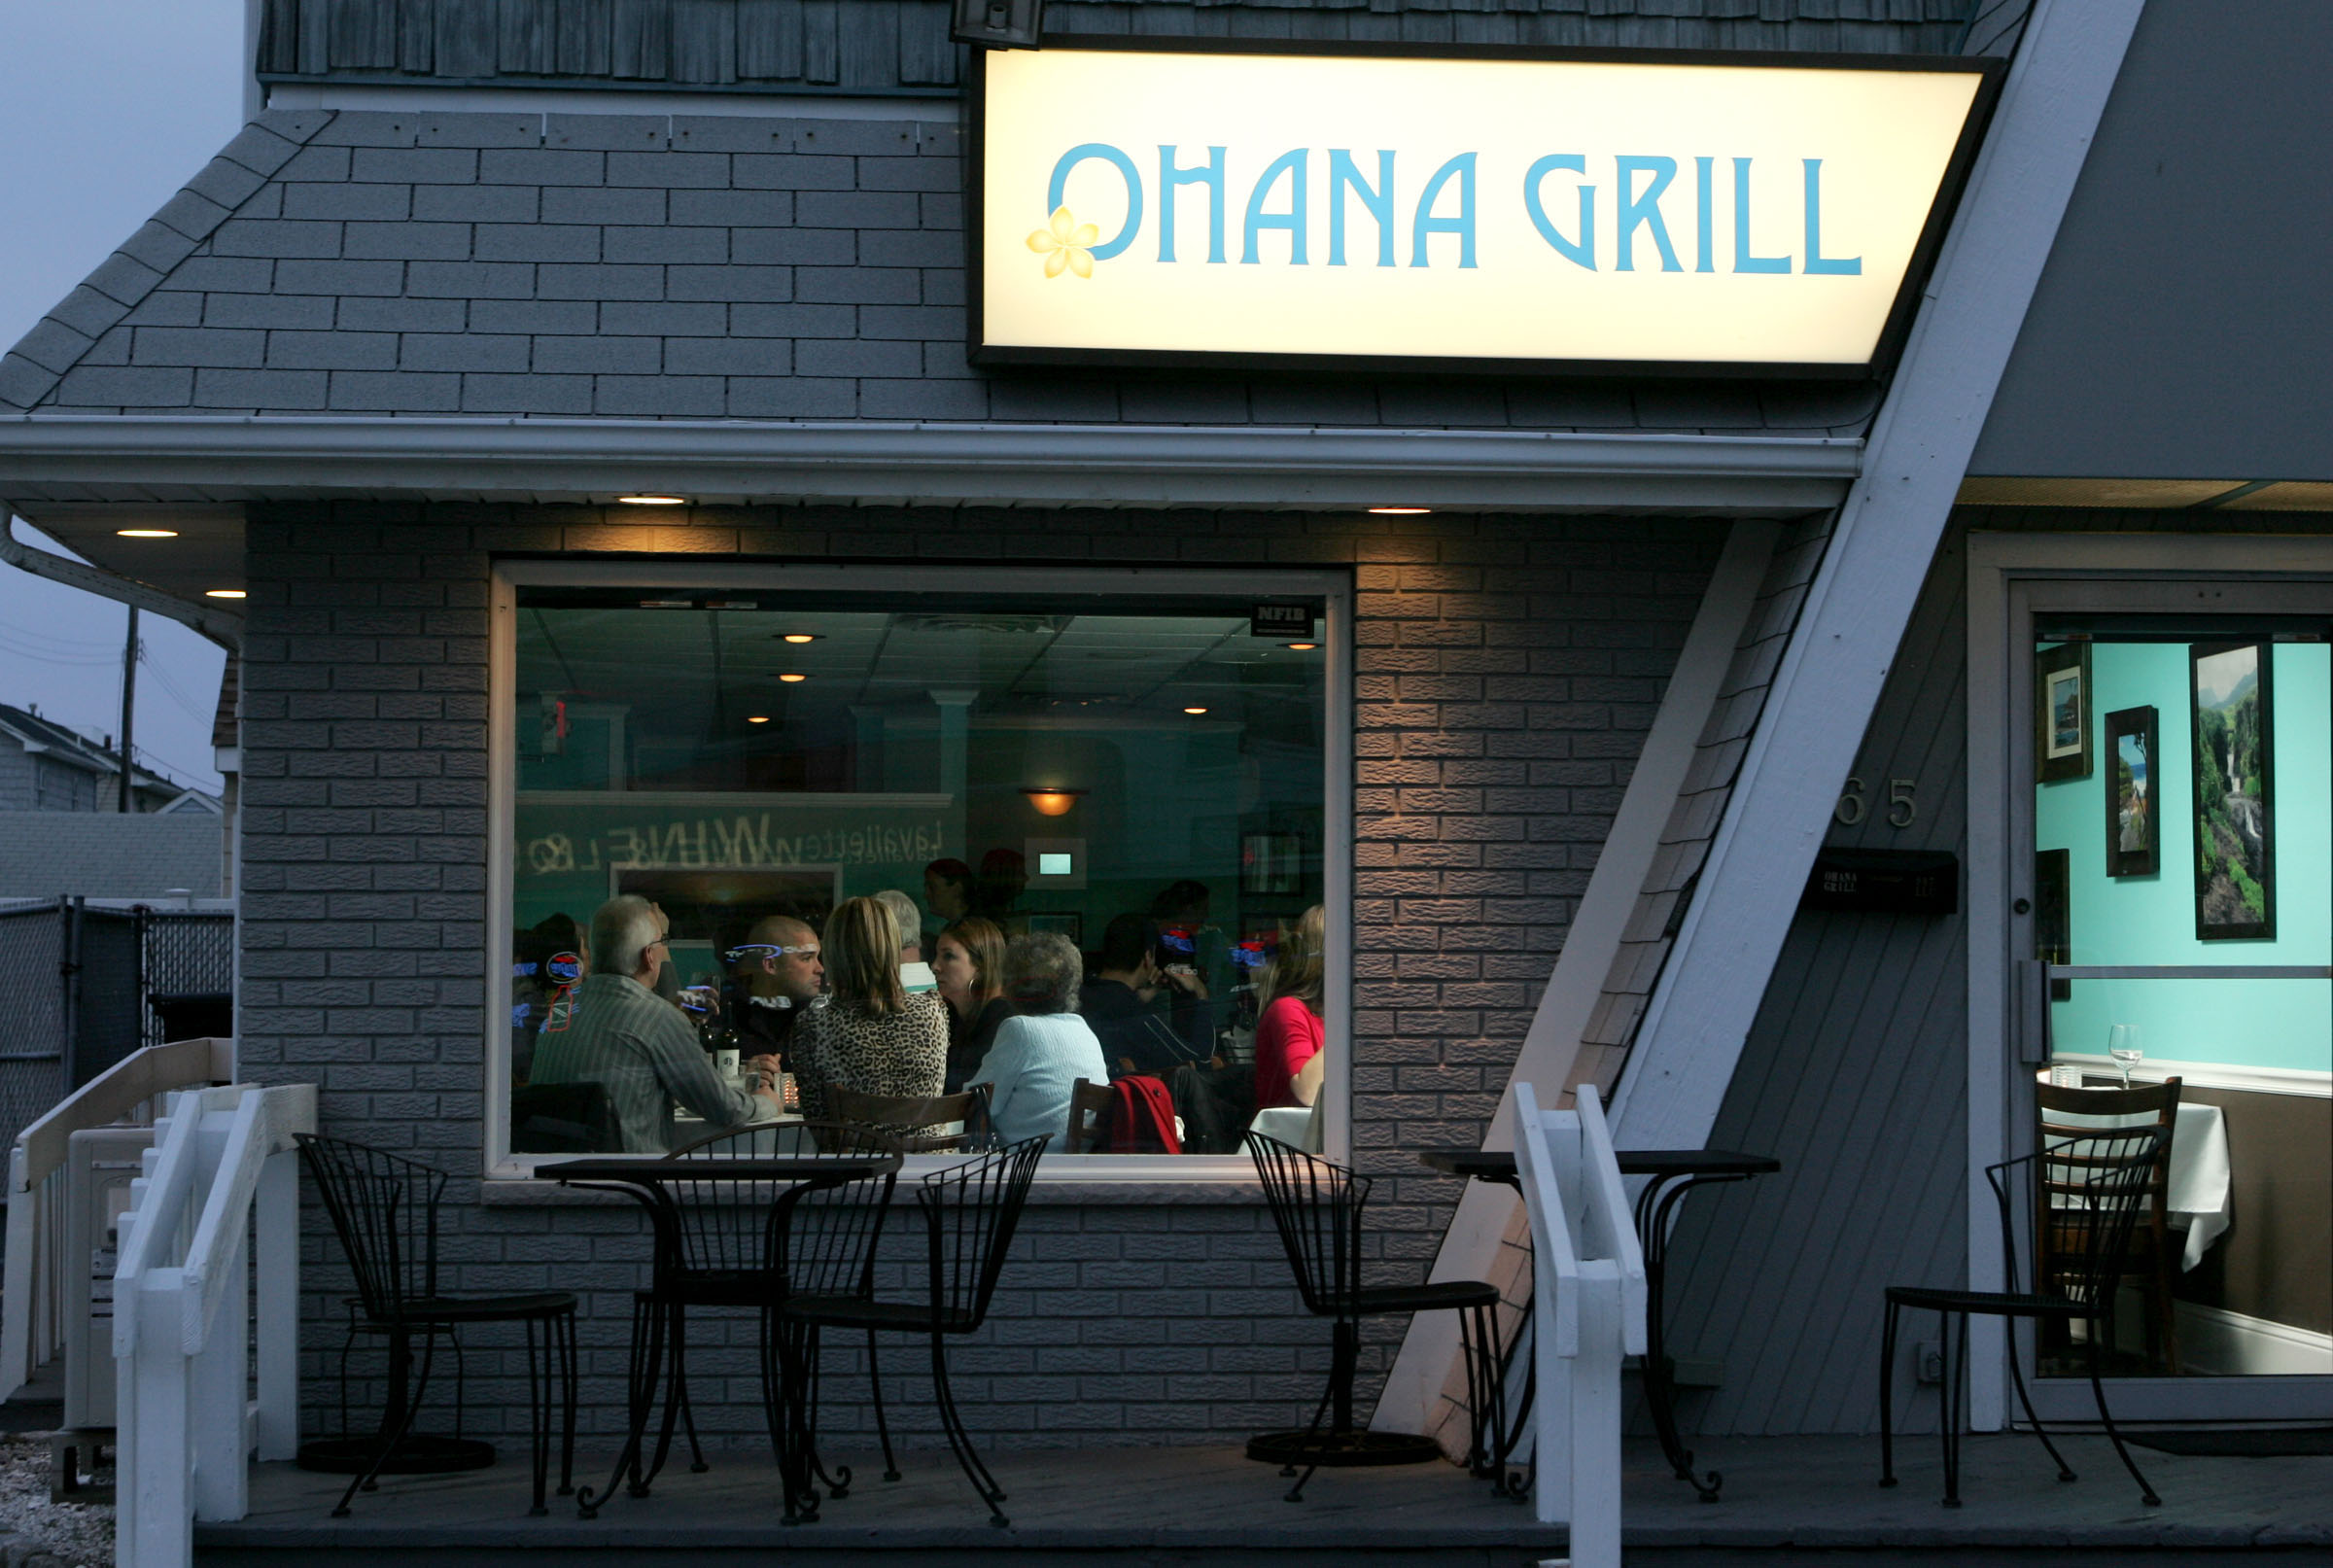 Exterior of The Ohana Grill in Lavallete on opening night, April 8, 2011.  PHOTO BY THOMAS P. COSTELLO